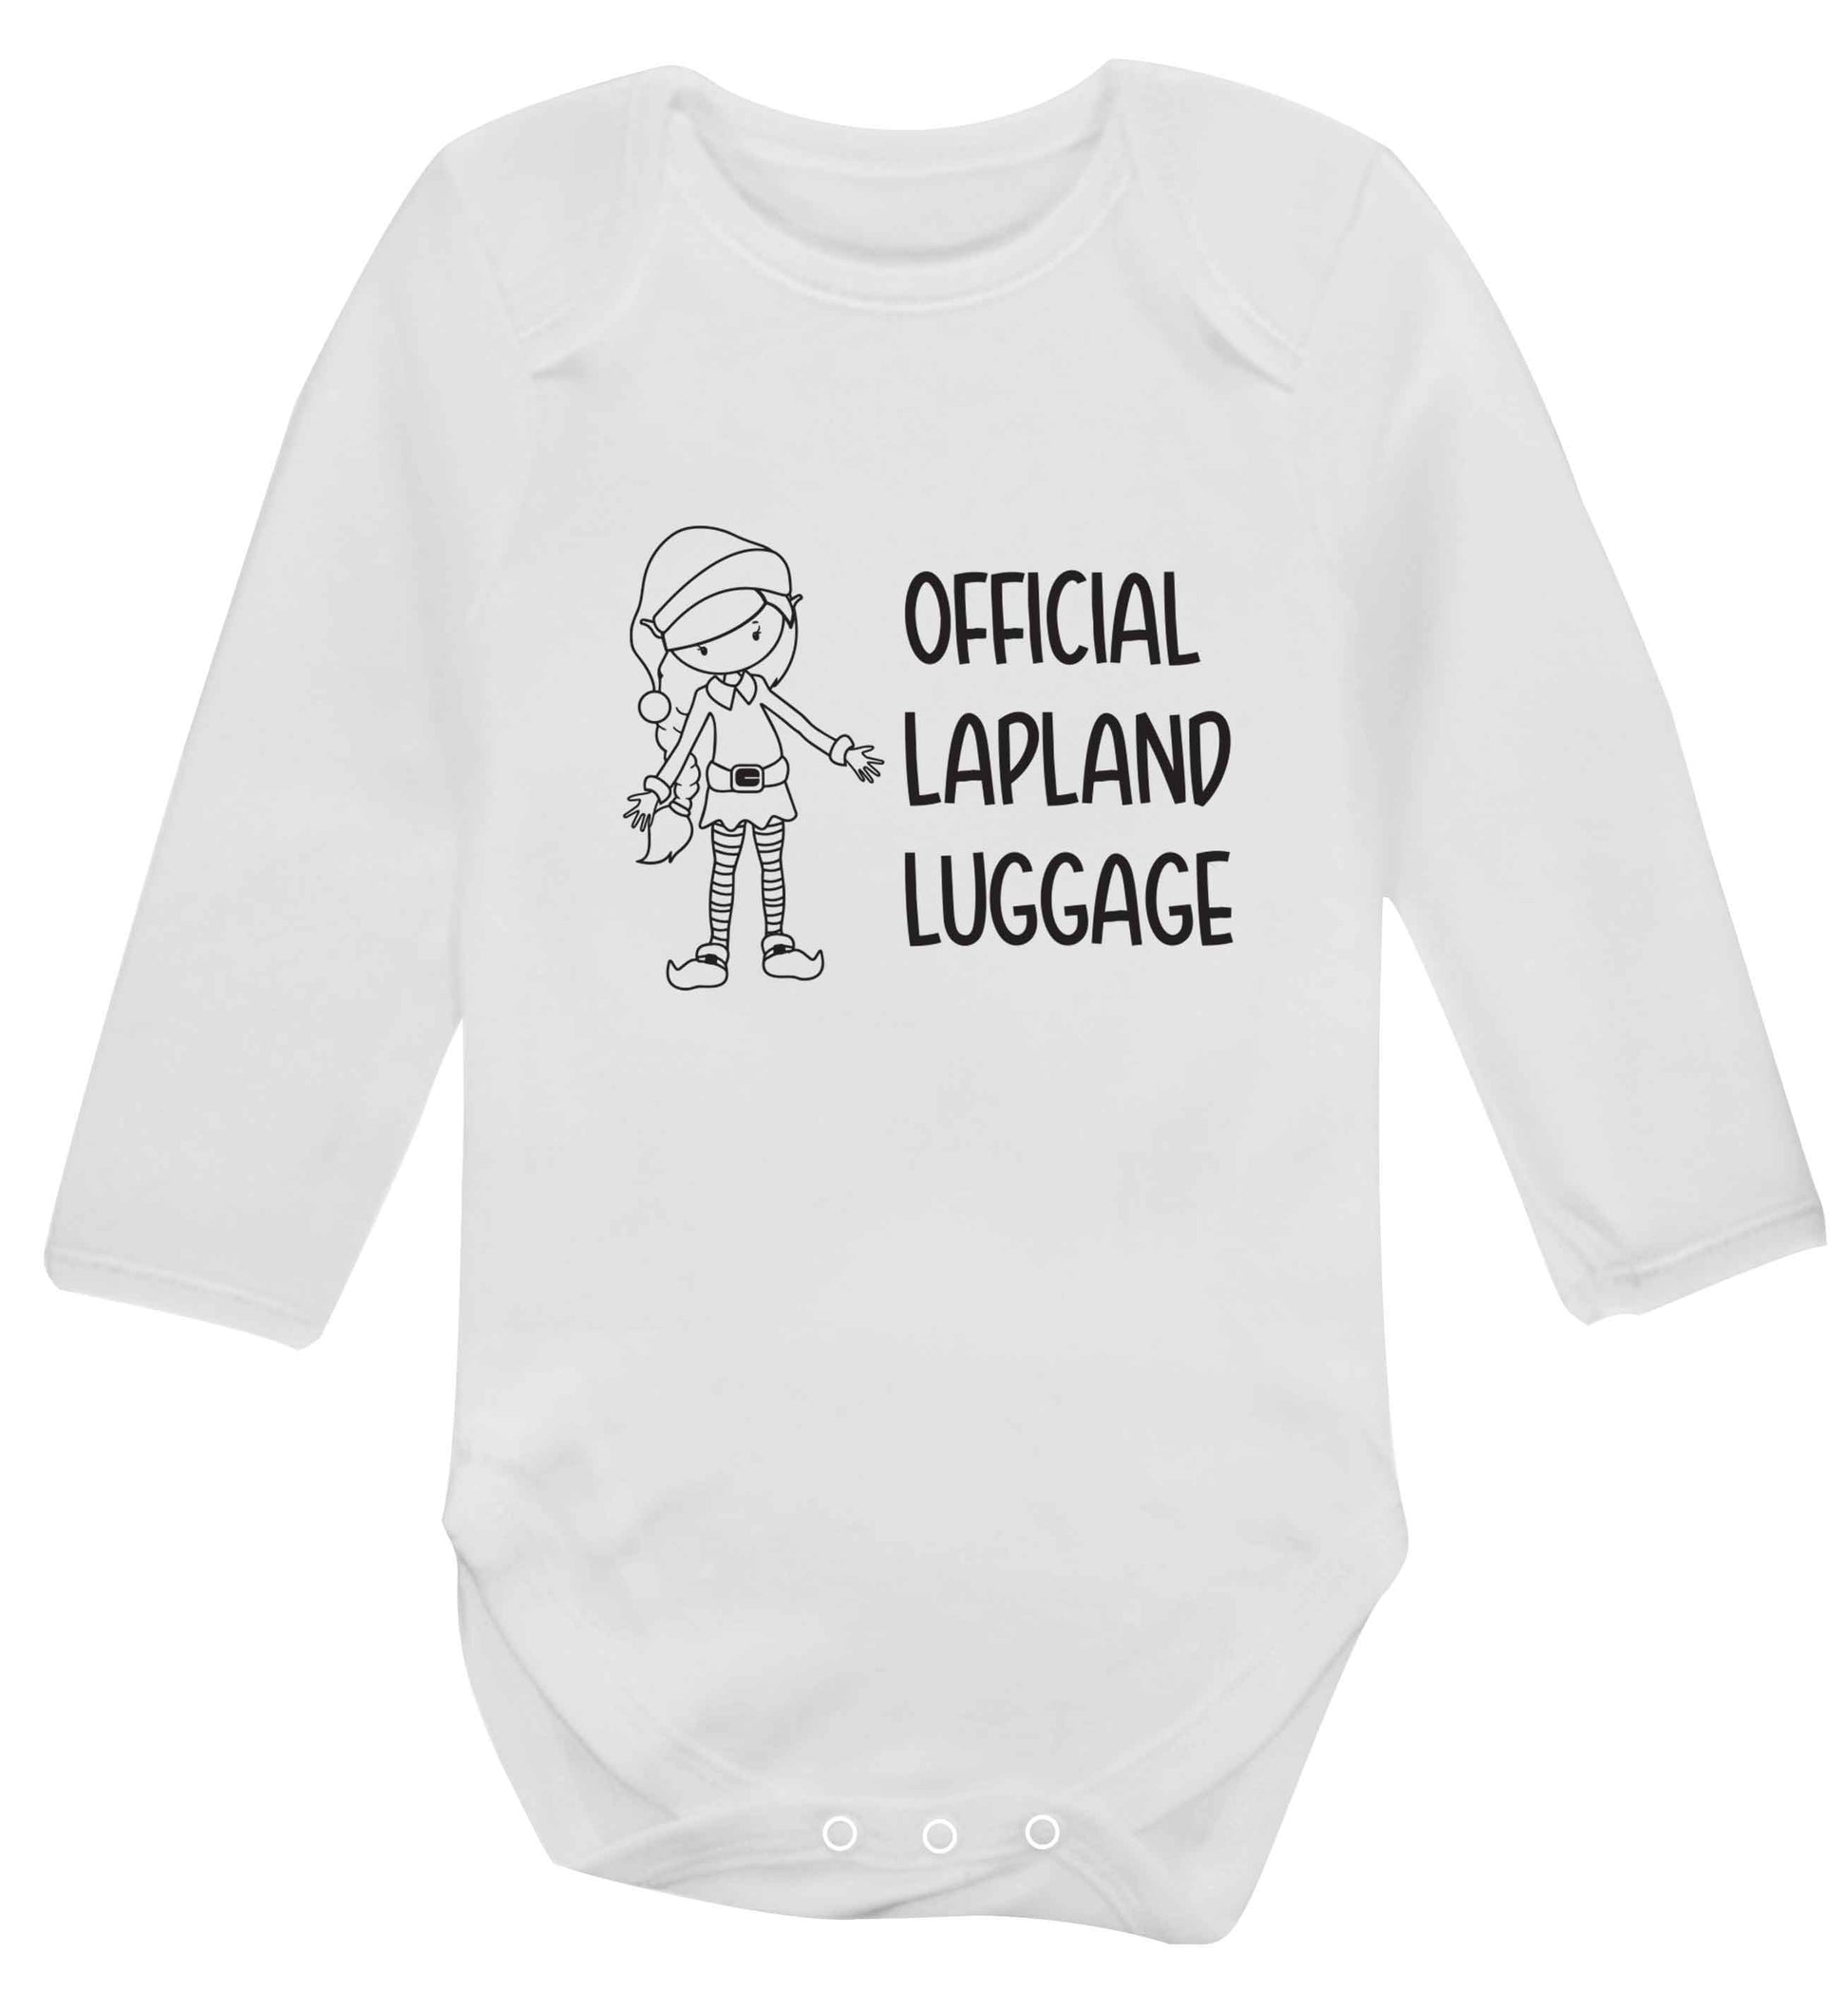 Official lapland luggage - Elf snowflake baby vest long sleeved white 6-12 months